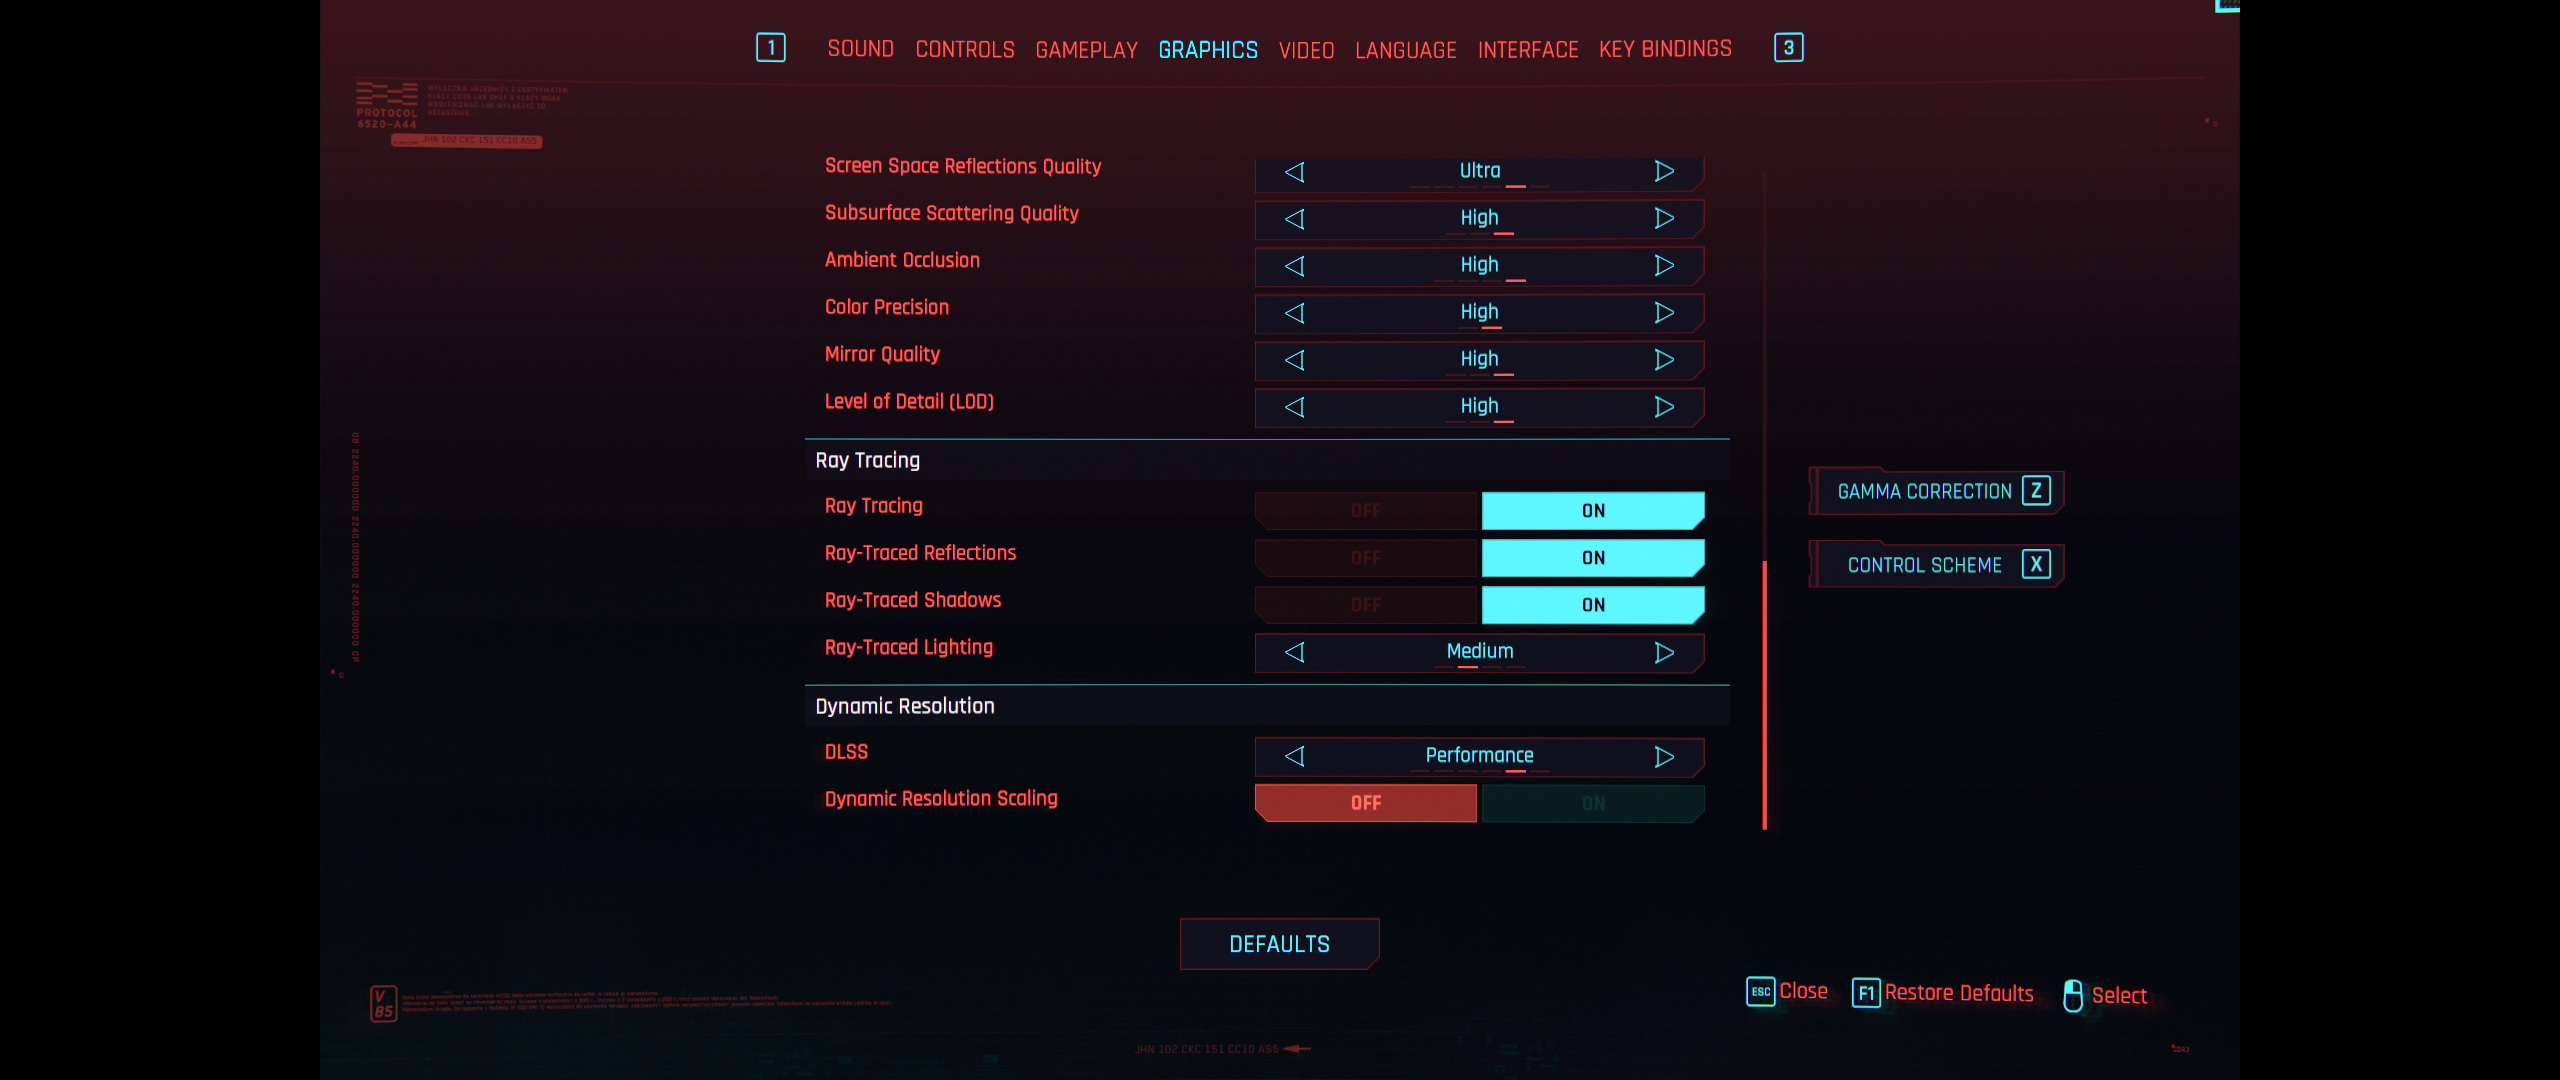 Cyberpunk 2077 Settings and Graphic Options in PC Version - picture #3